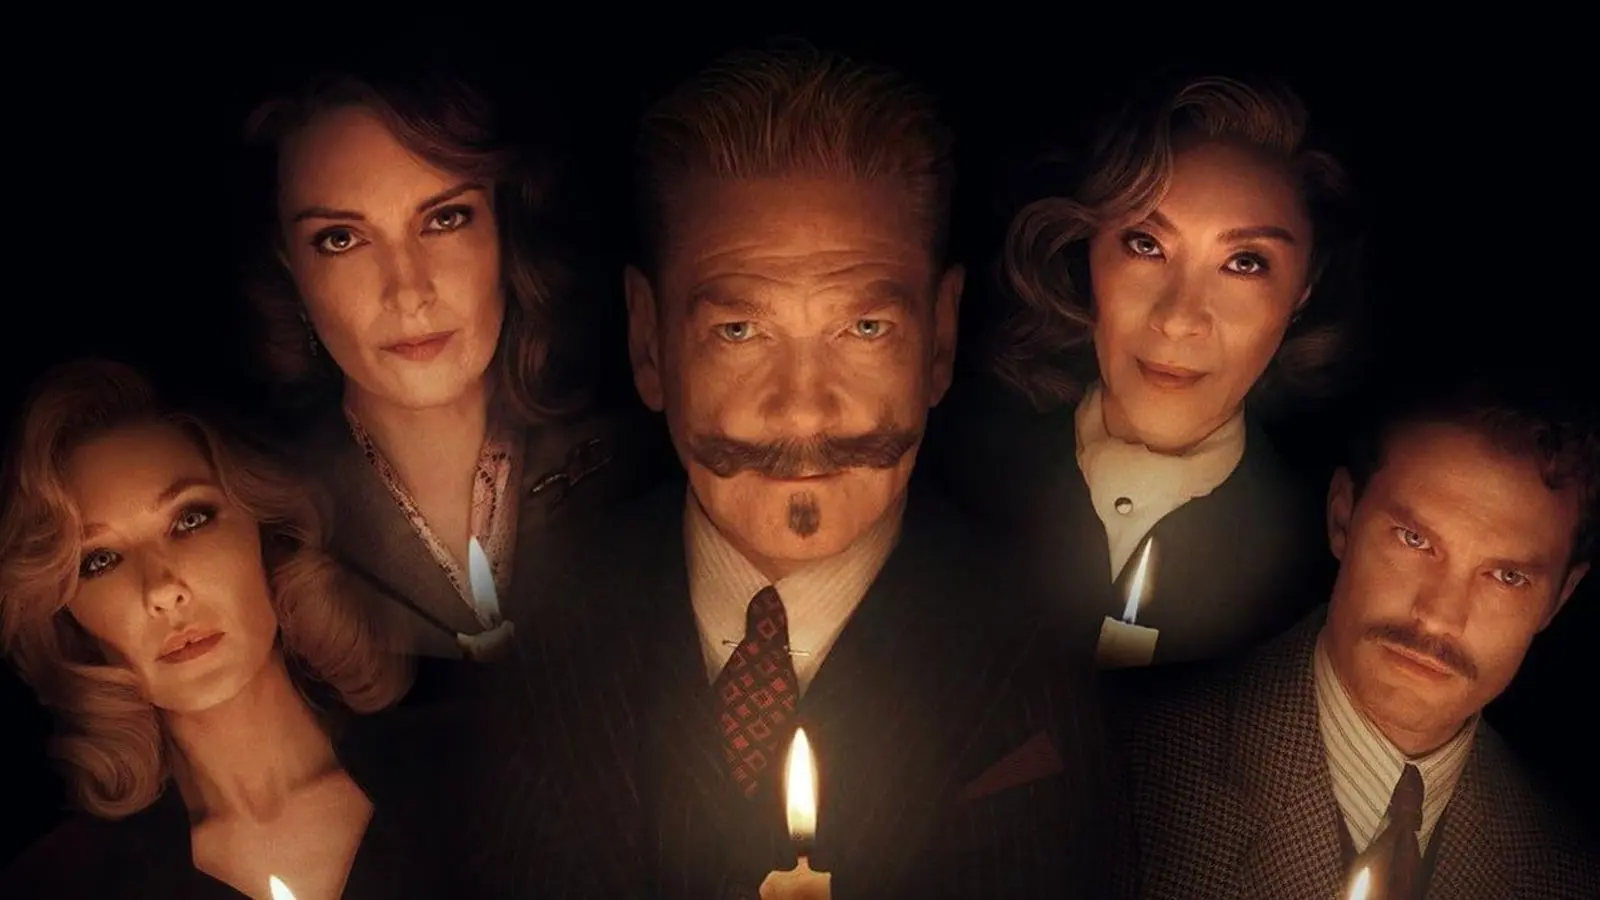 Kenneth-Branagh-Returns-as-Poirot-in-A-Haunting-in-Venice-A-Supernatural-Twist-to-the-Detectives-World.jpg